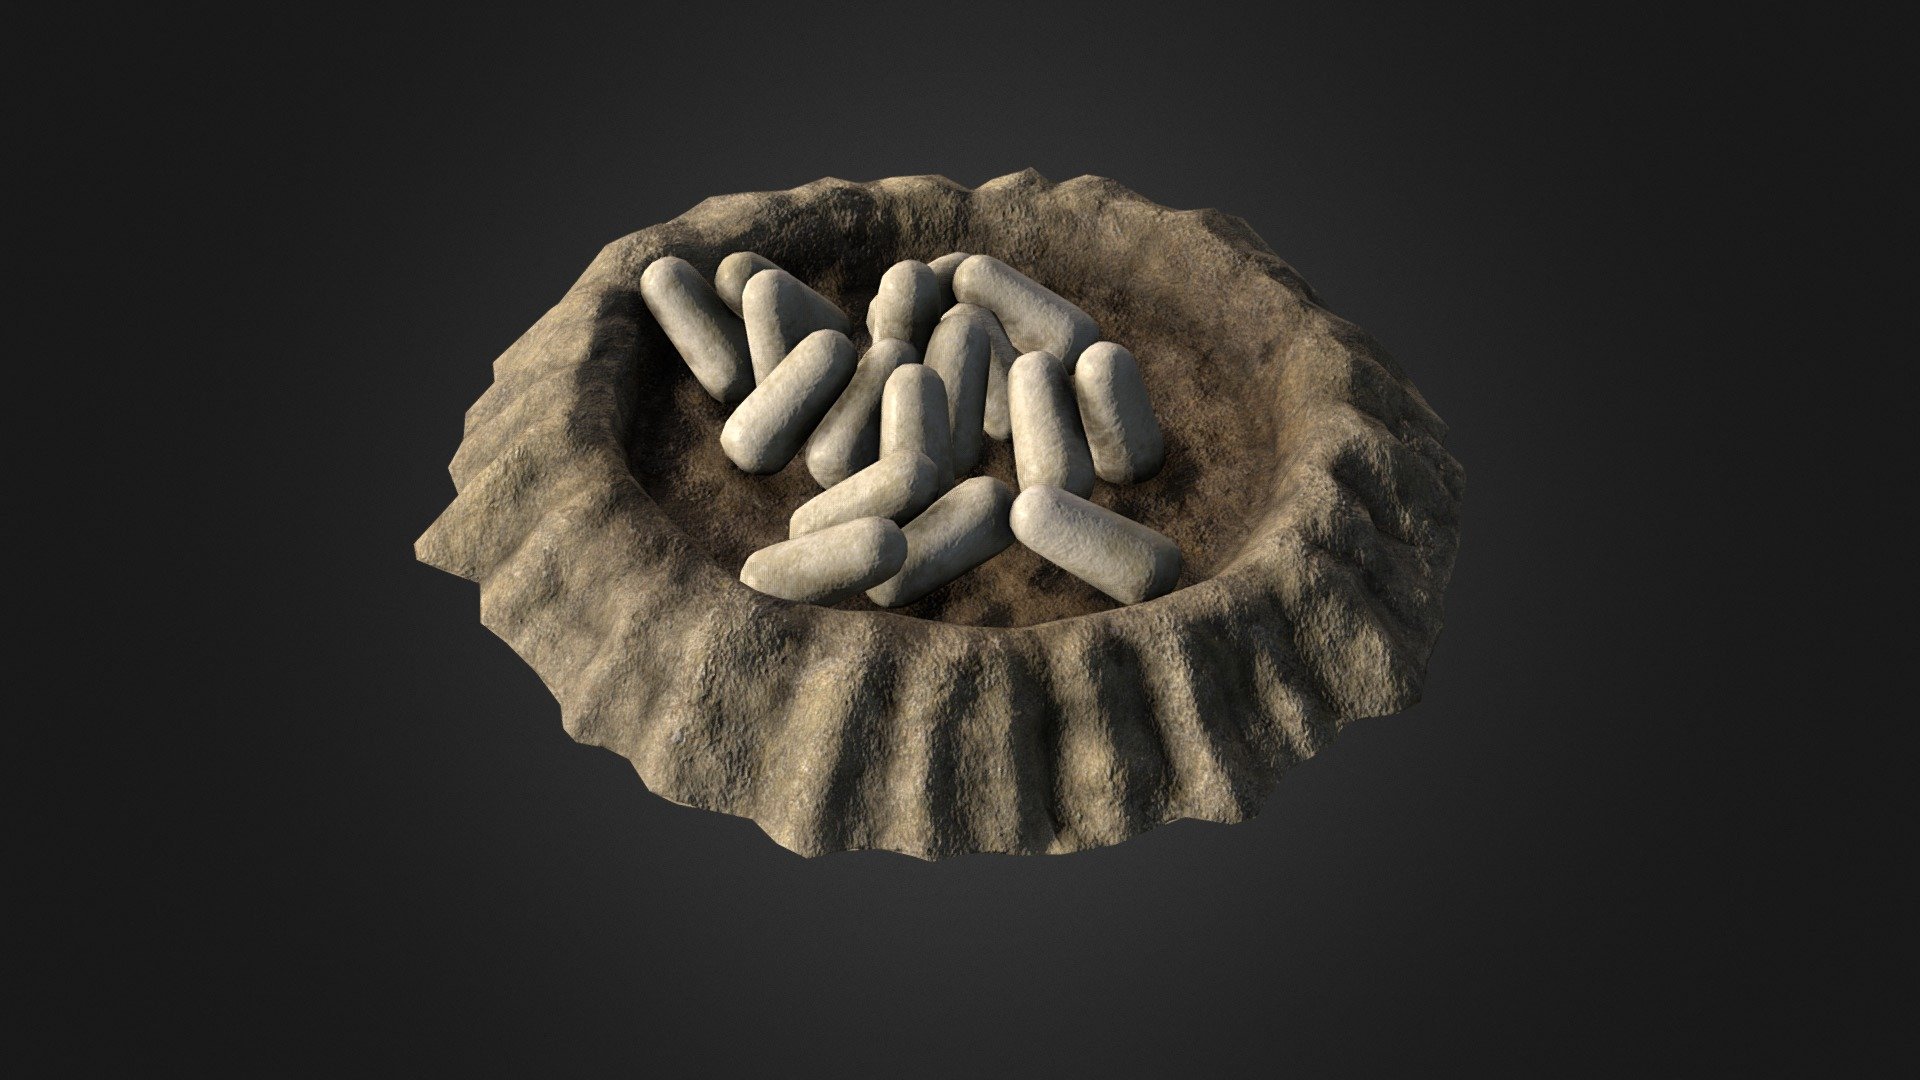 This is an asset I made for a game project in development that I got permission to upload. It's definitely different than other projects I've done, but that was my favorite part about it!

The nest base was blocked out in Maya, brought into Zbrush to get the secondary sand shapes around the outside, and retopologized back in Maya. It was then baked and textured in Substance Painter. 

It was really nice getting consistent feedback from my art director on how to push the details on an environment piece. I can't wait to see what I get to work on next 3d model